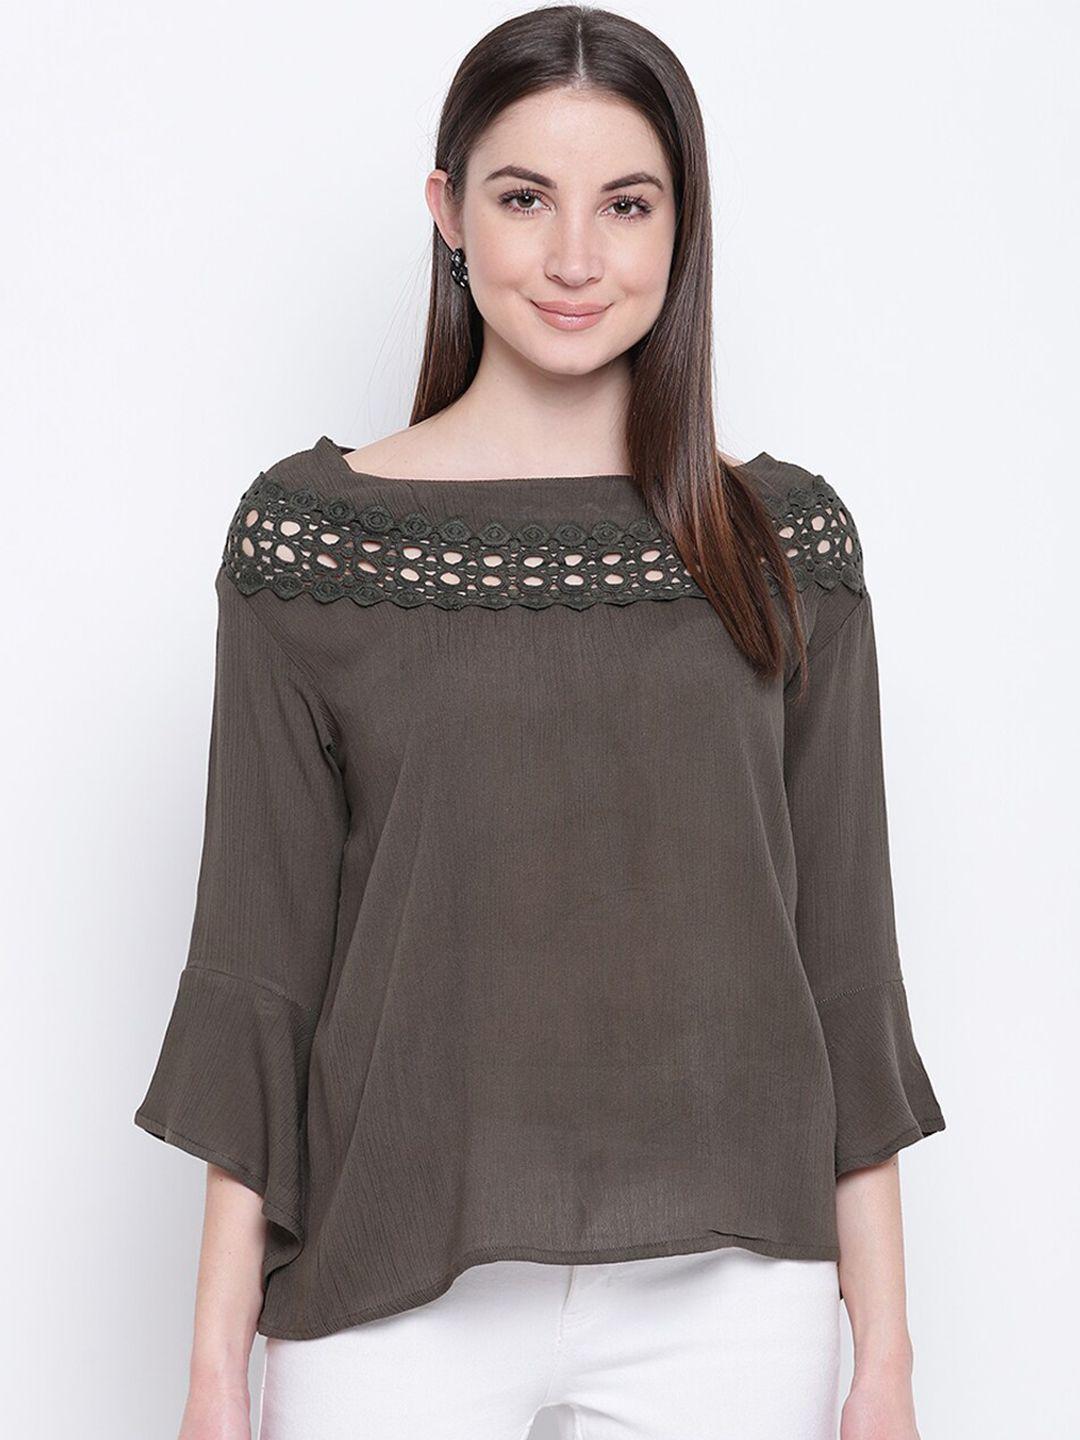 mayra-olive-green-a-line-top